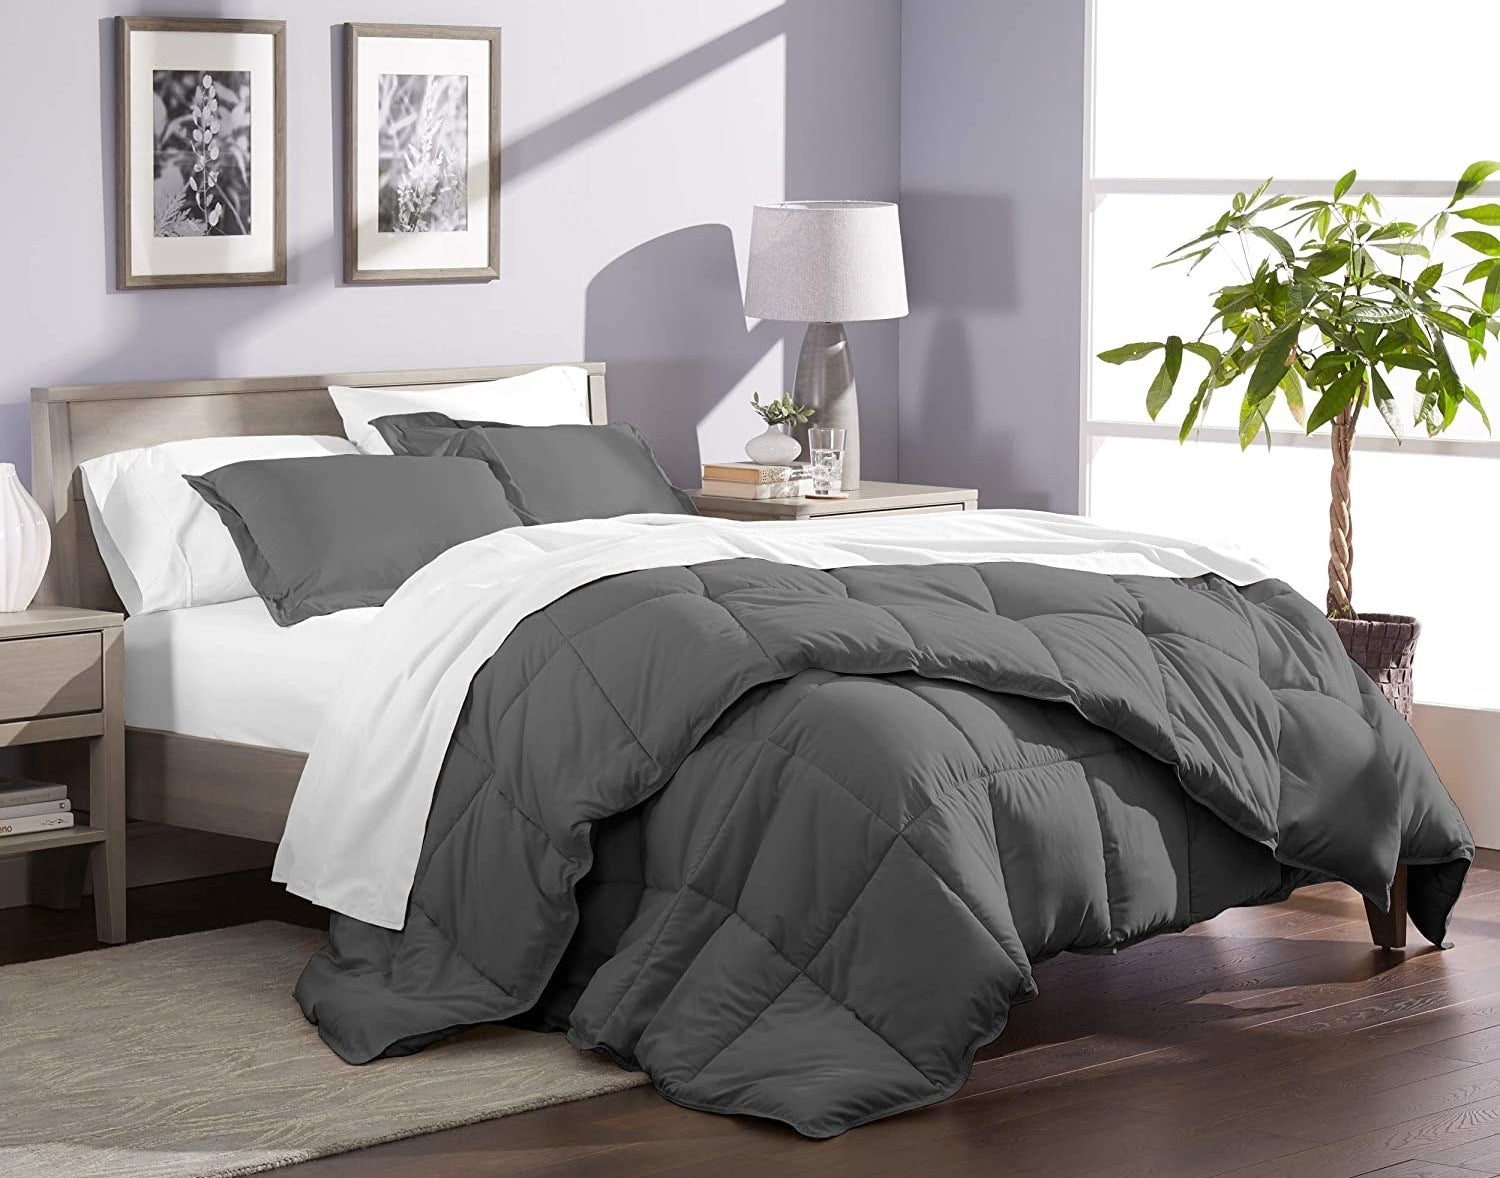 The comforter set on a bed